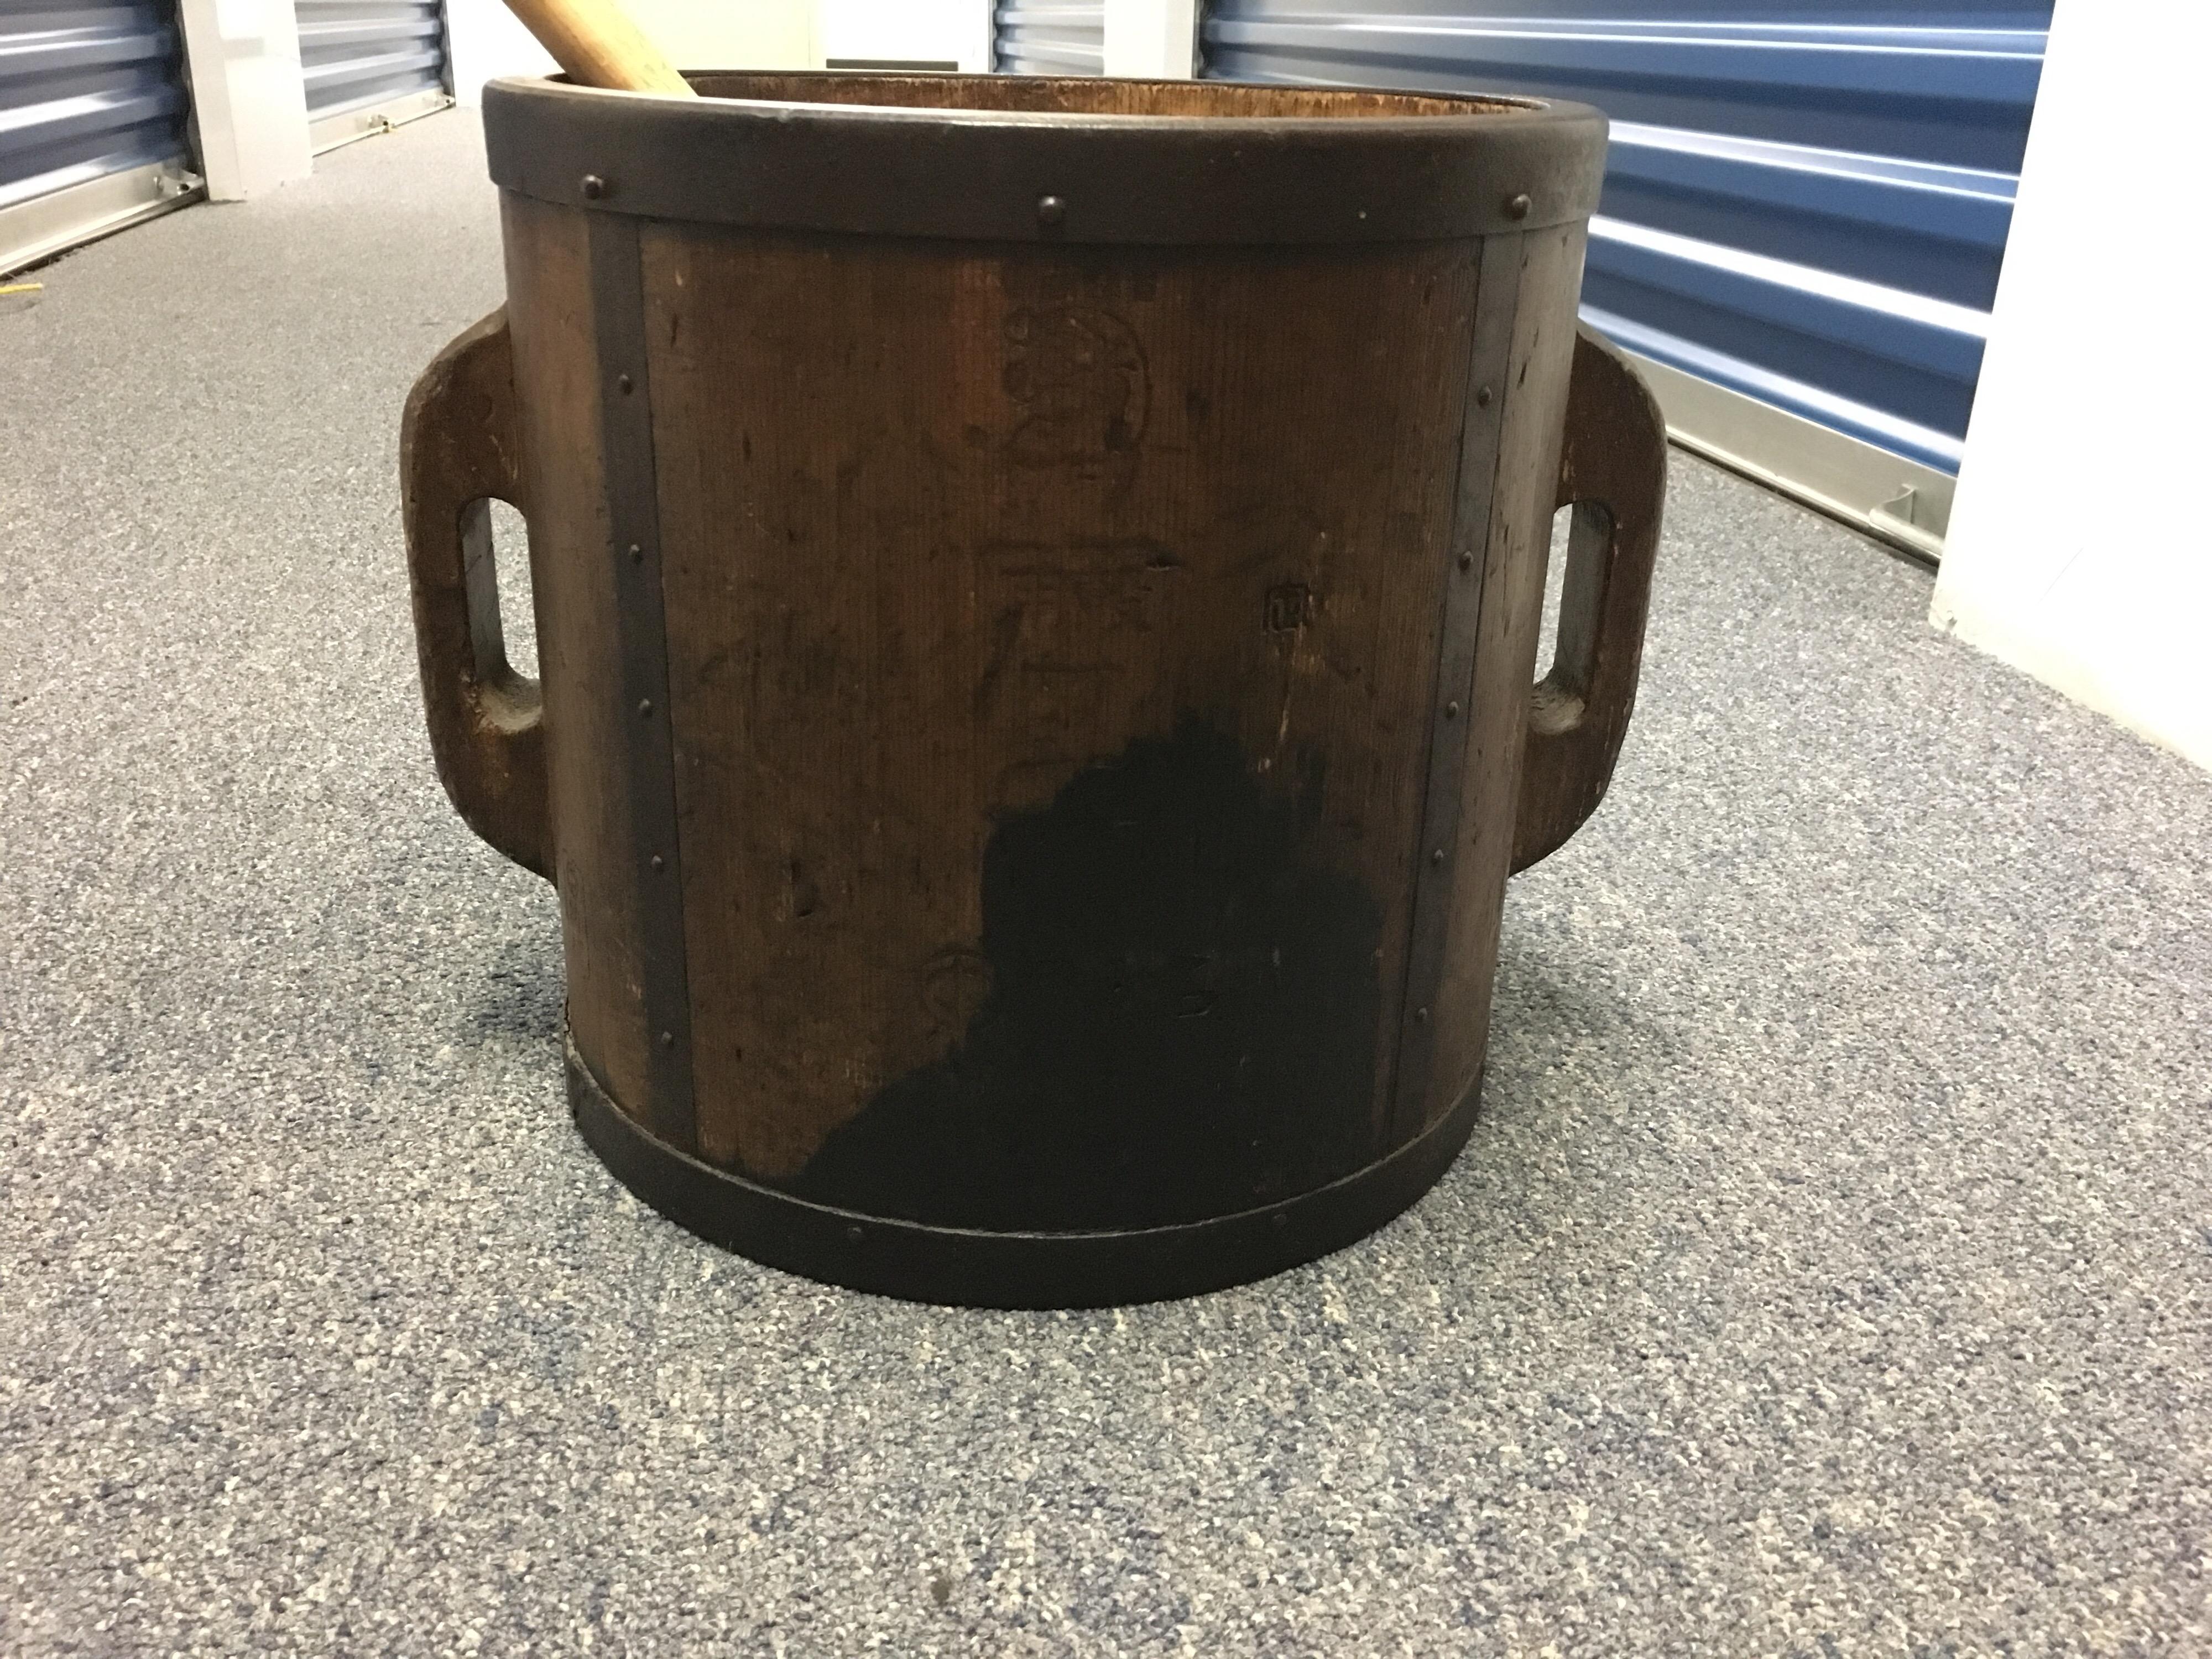 Japanese Ittomasu rice measure bucket, early 20th century
Fire stamped on the side.